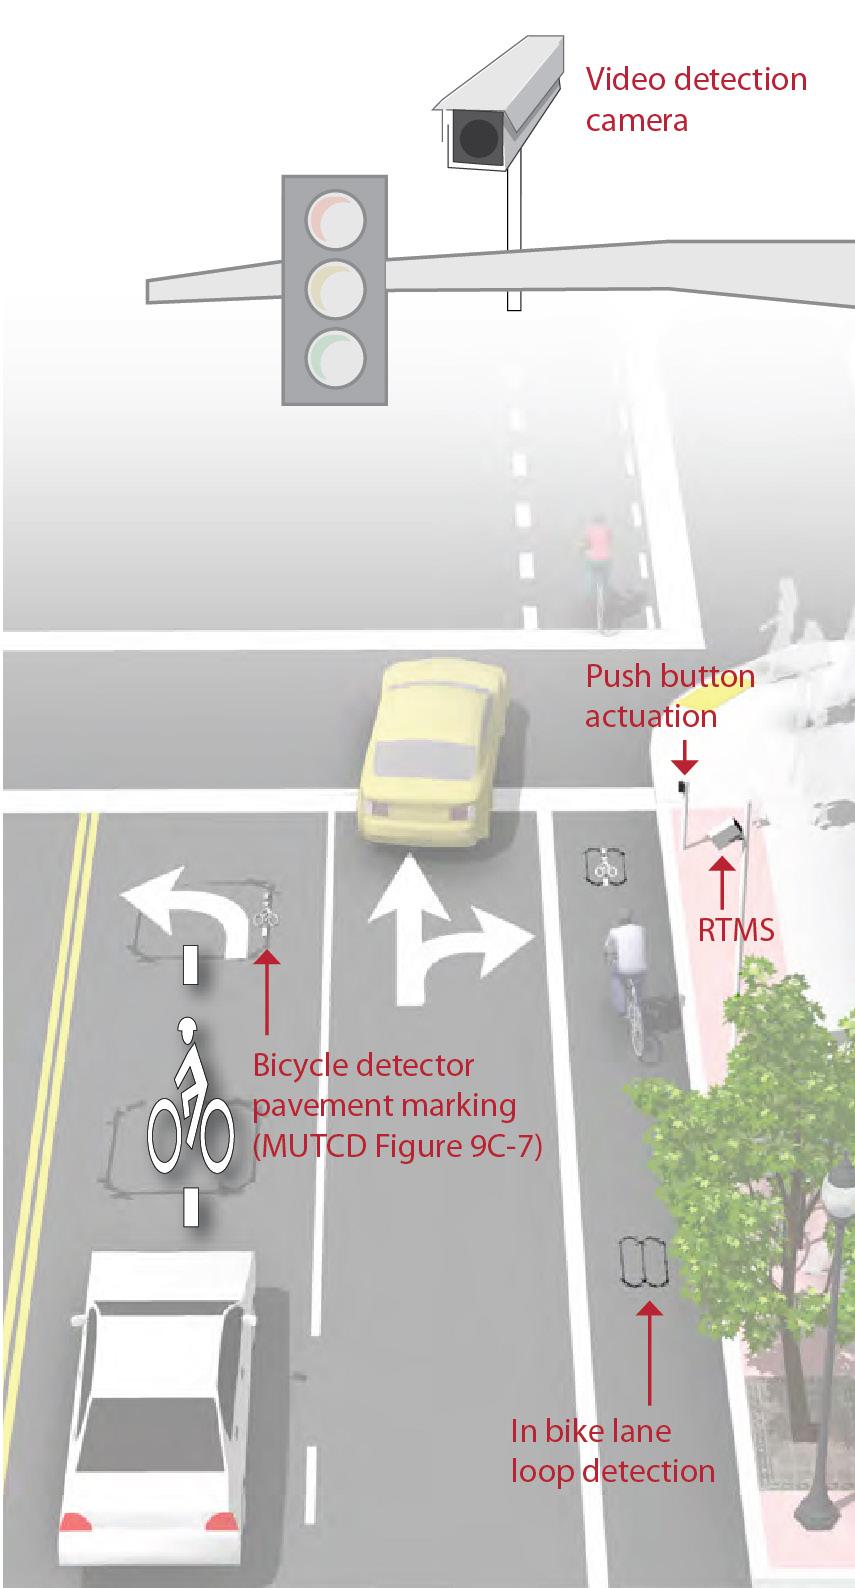 9.13.3 Bicycle Detection and Actuation 9.13.3.1 Description Figure 9-66. Bicycle Detection and Actuation 9.13.3.1.1 Push Button Actuation - User-activated button mounted on a pole facing the street.